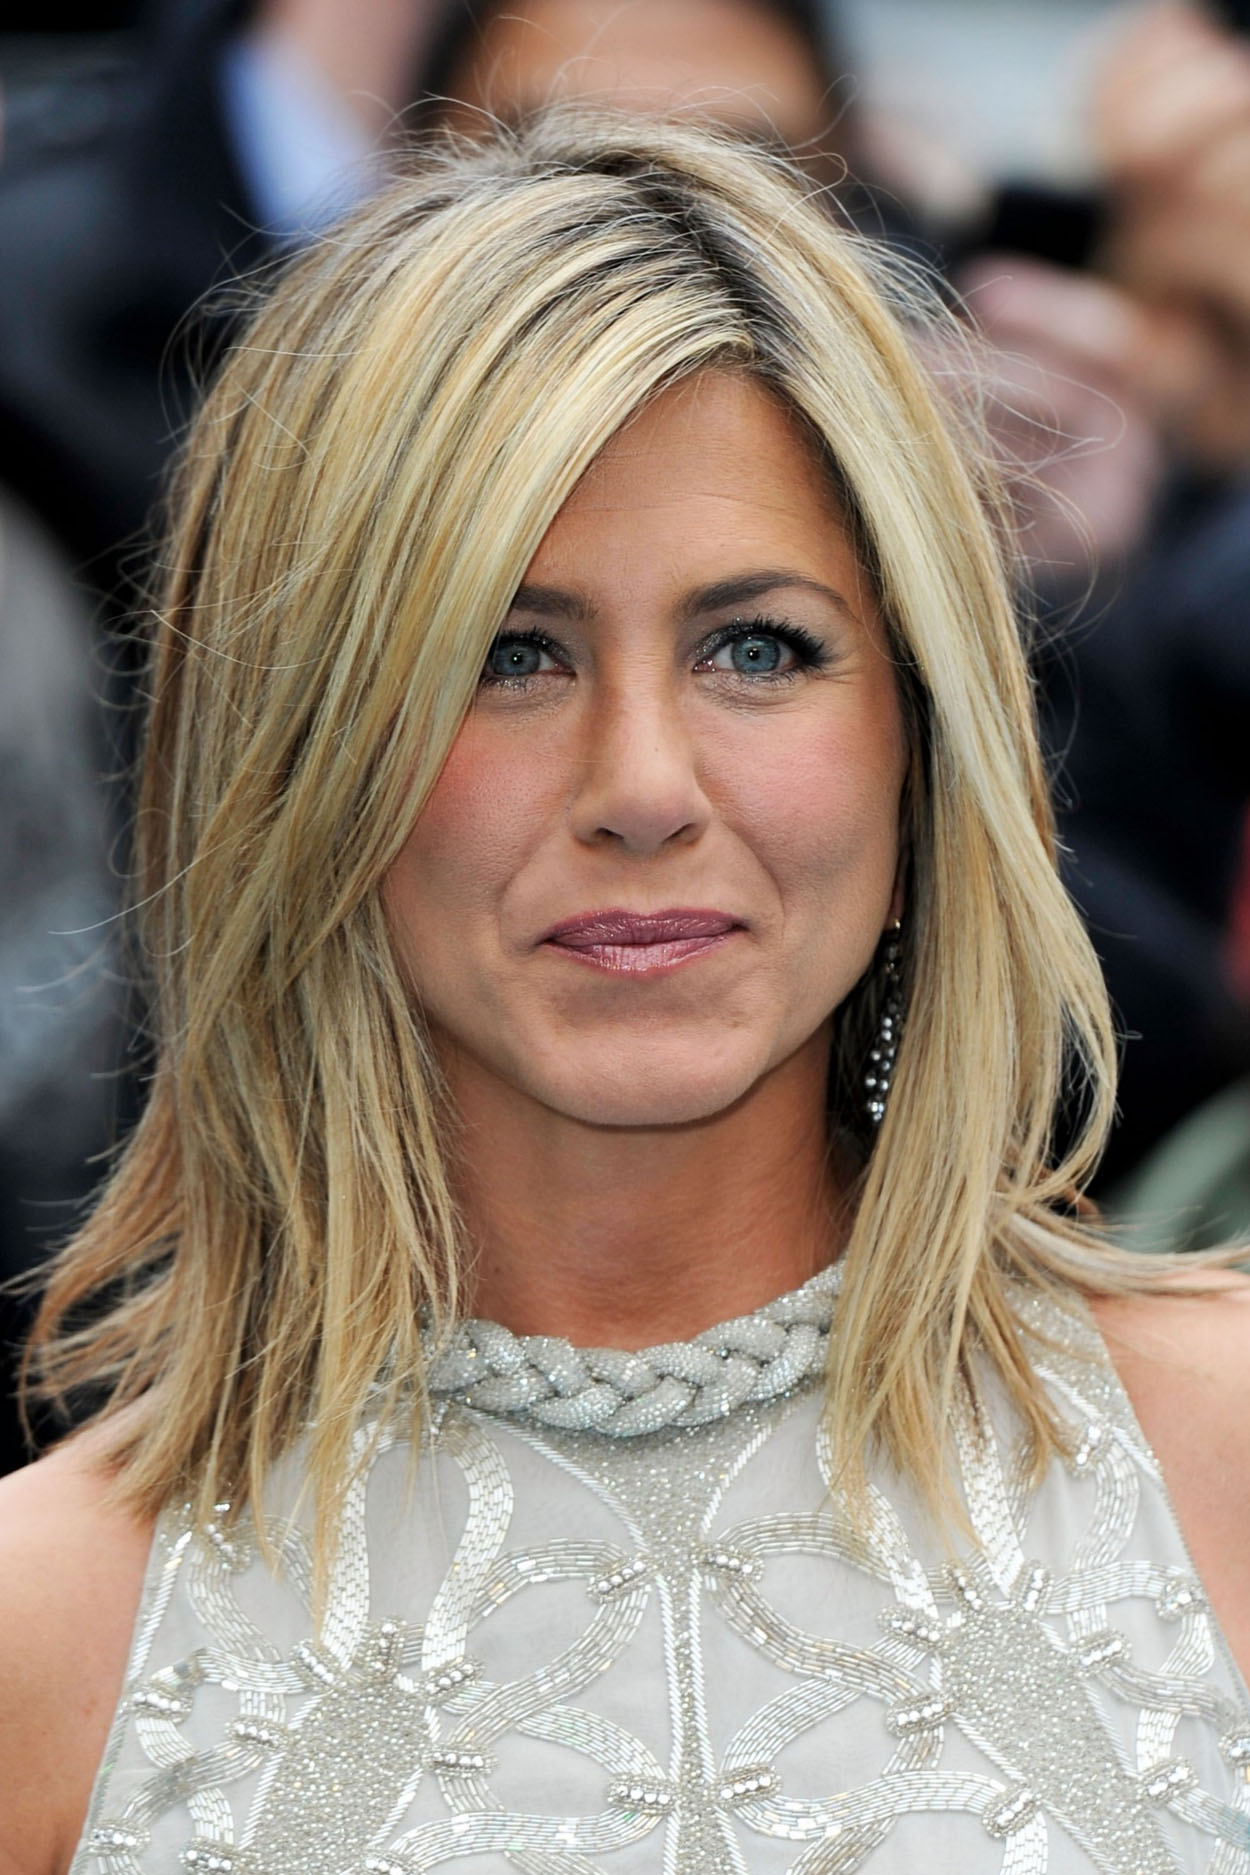 Jennifer Aniston attend the UK premiere of the movie Horrible Bosses at BFI Southbank on 20th July 2011